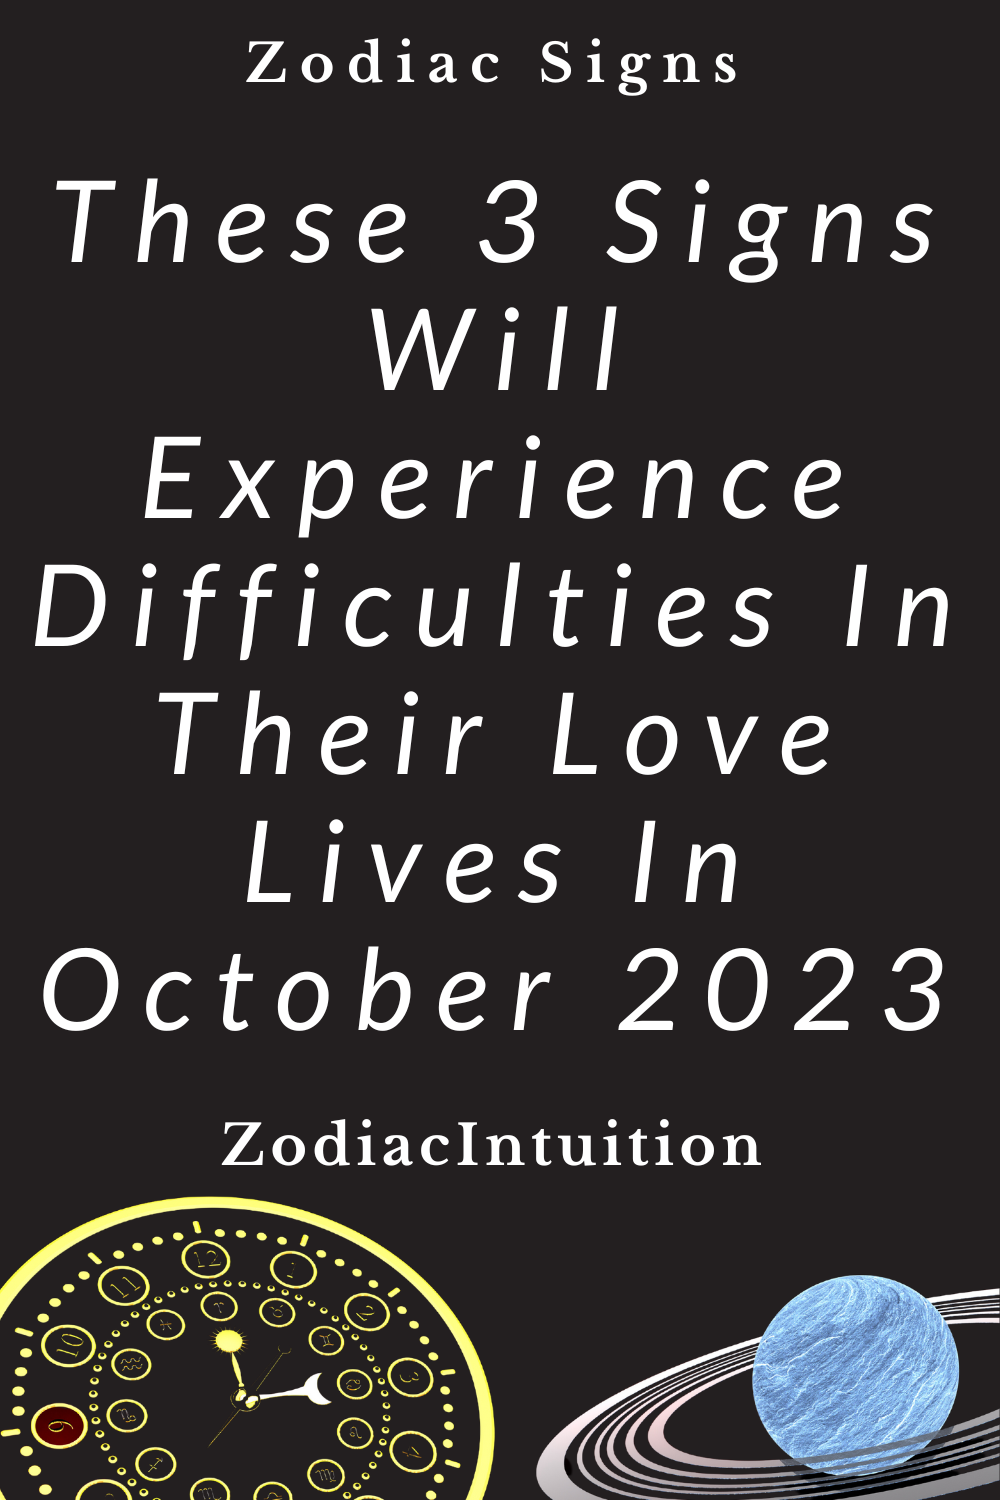 These 3 Signs Will Experience Difficulties In Their Love Lives In October 2023